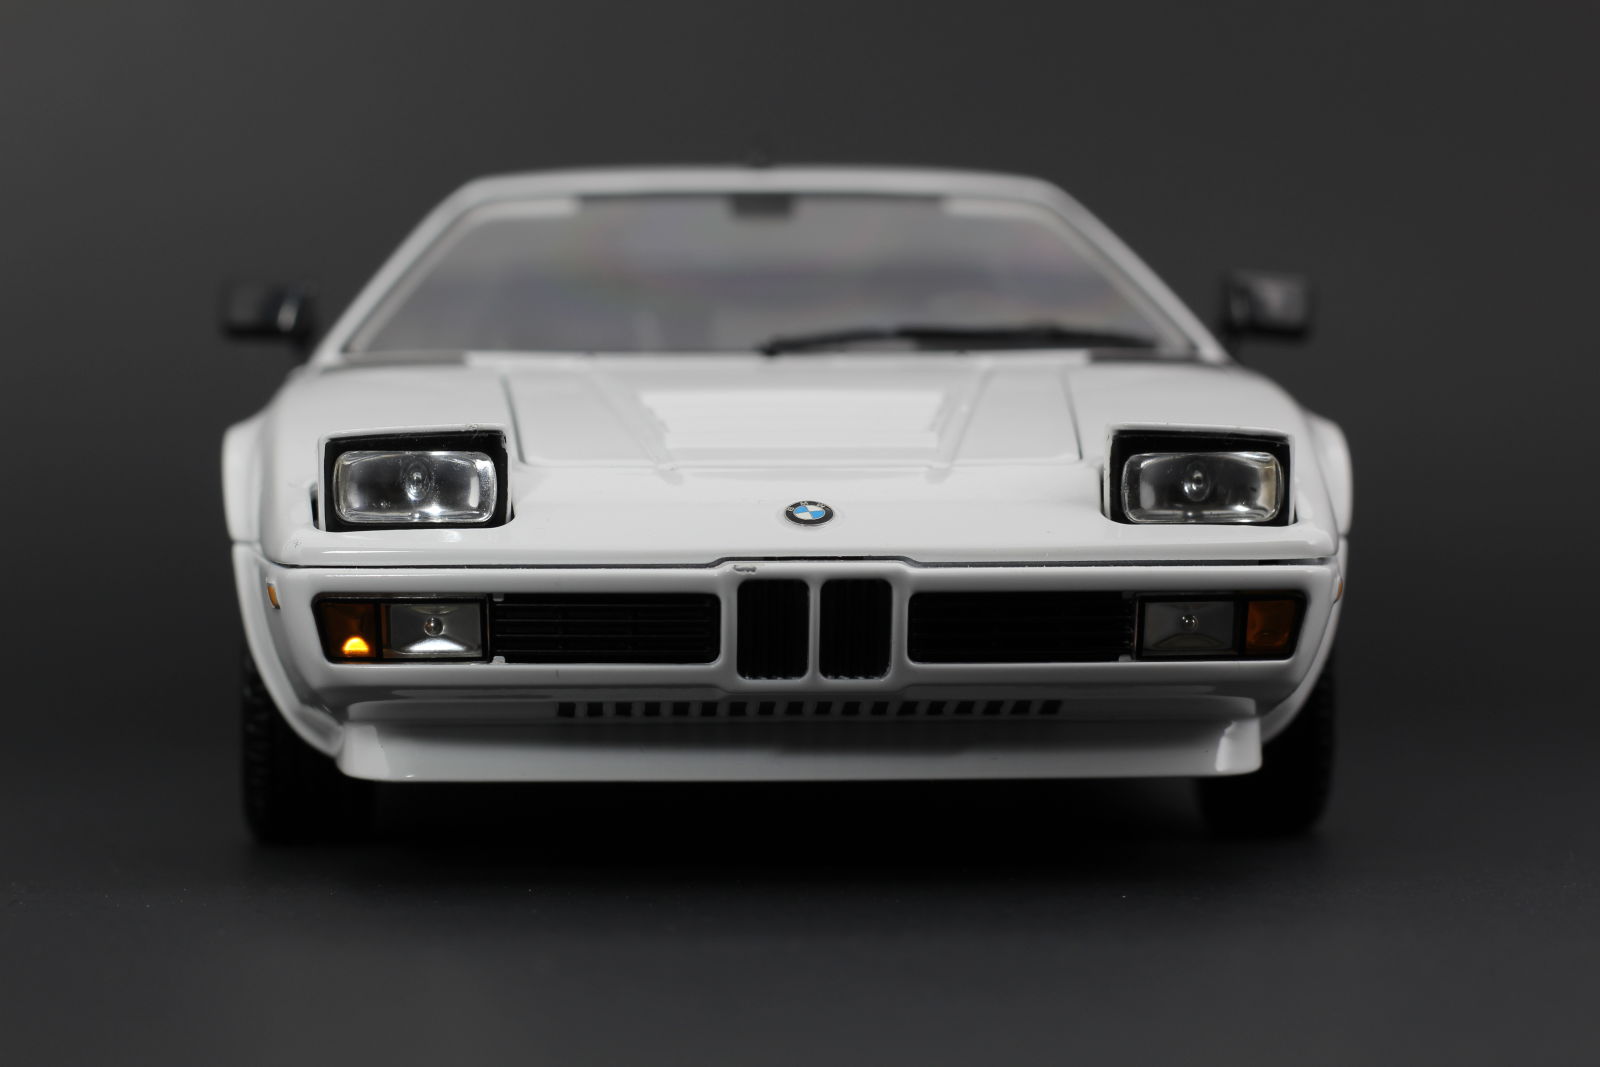 Illustration for article titled LaLD ///May: Norev BMW E26 M1